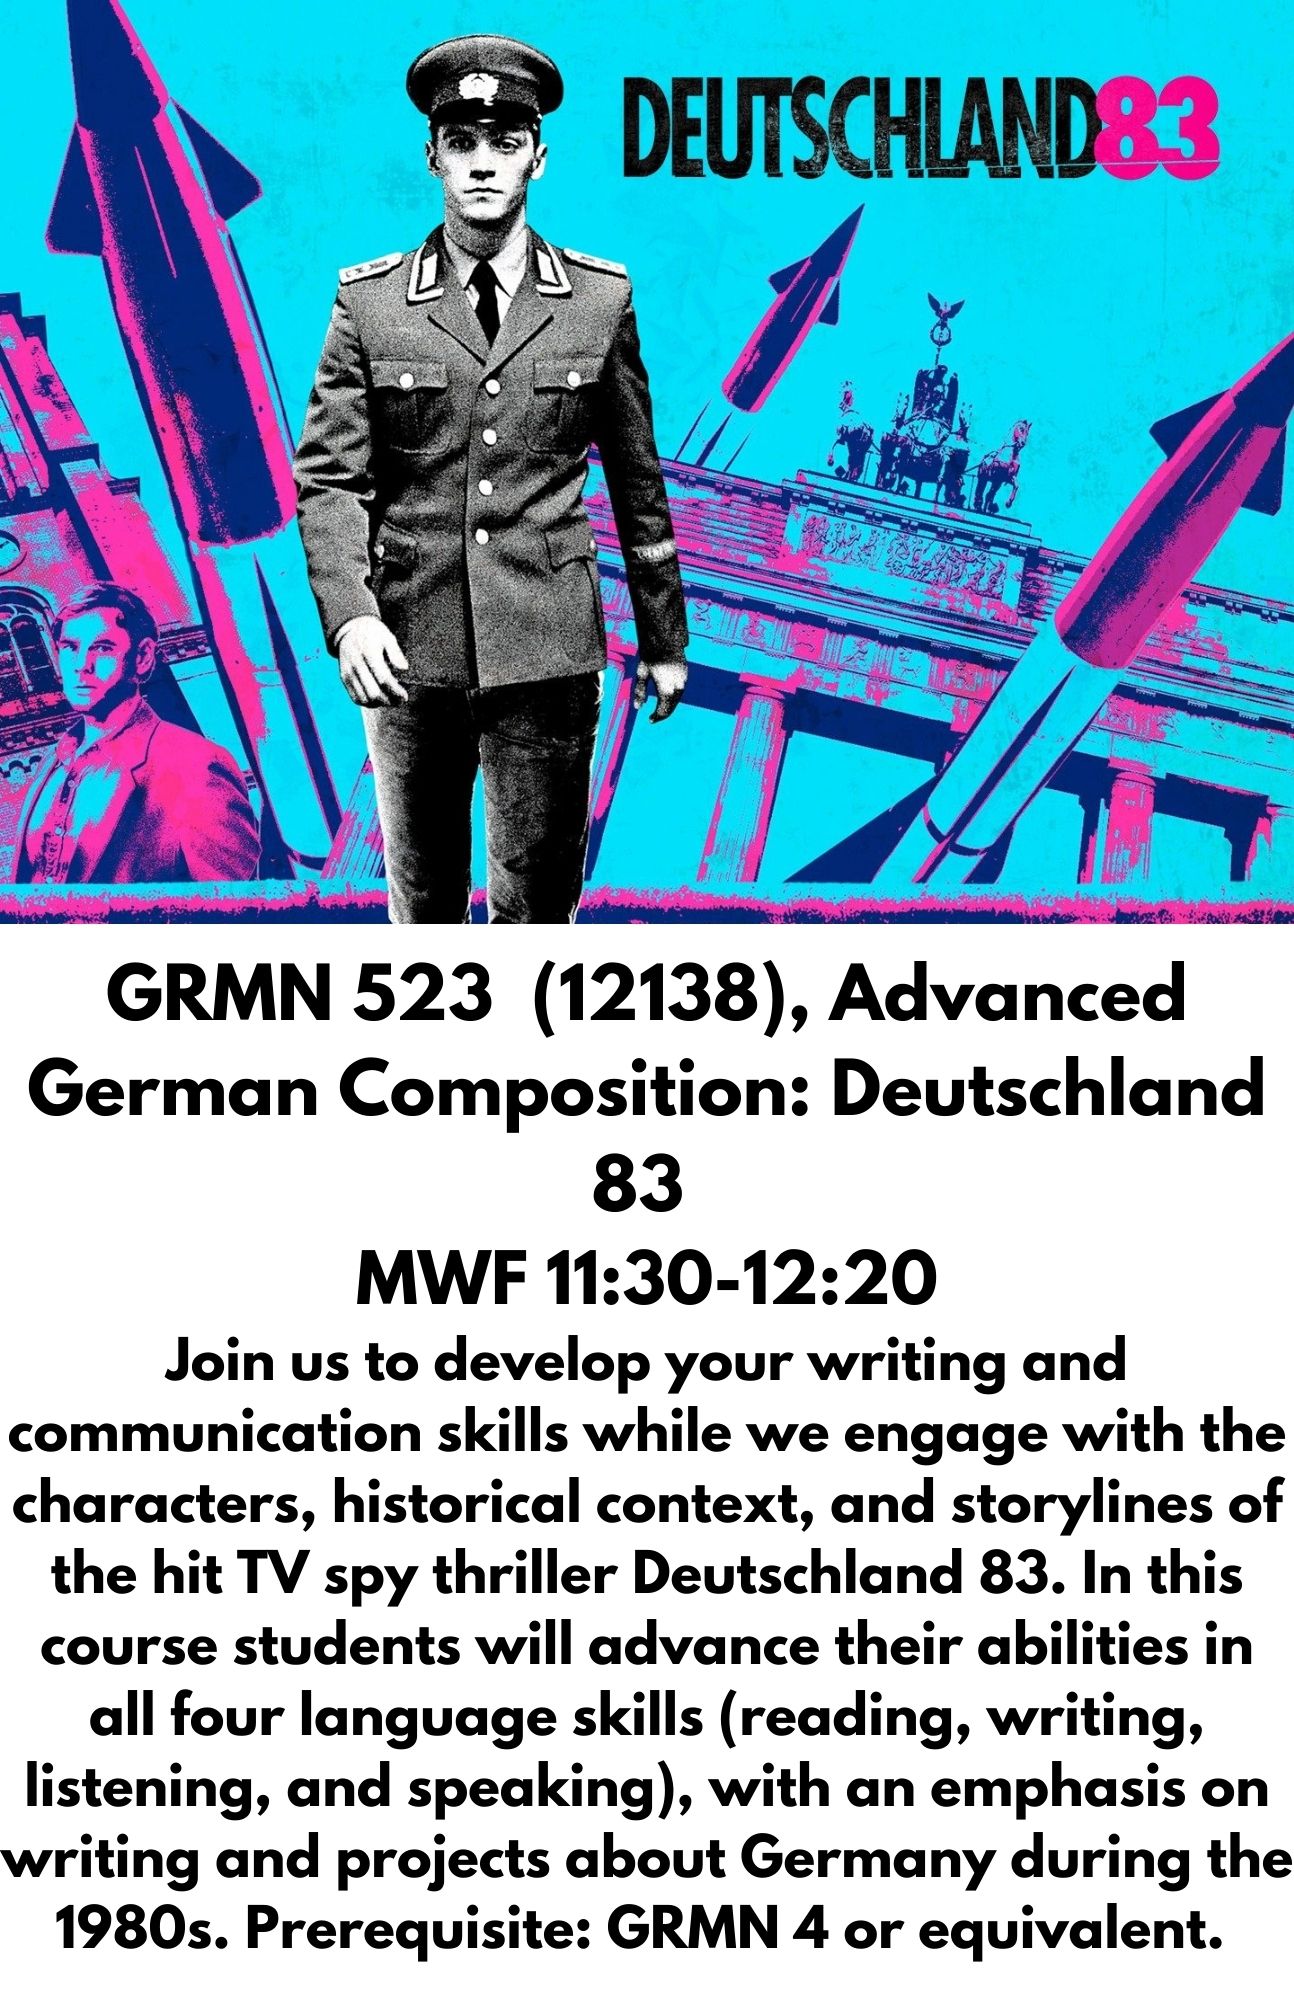 GRMN 523  (12138), Advanced German Composition: Deutschland 83  MWF 11:30-12:20 Join us to develop your writing and communication skills while we engage with the characters, historical context, and storylines of the hit TV spy thriller Deutschland 83. In this course students will advance their abilities in all four language skills (reading, writing, listening, and speaking), with an emphasis on writing and projects about Germany during the 1980s. Prerequisite: GRMN 4 or equivalent.